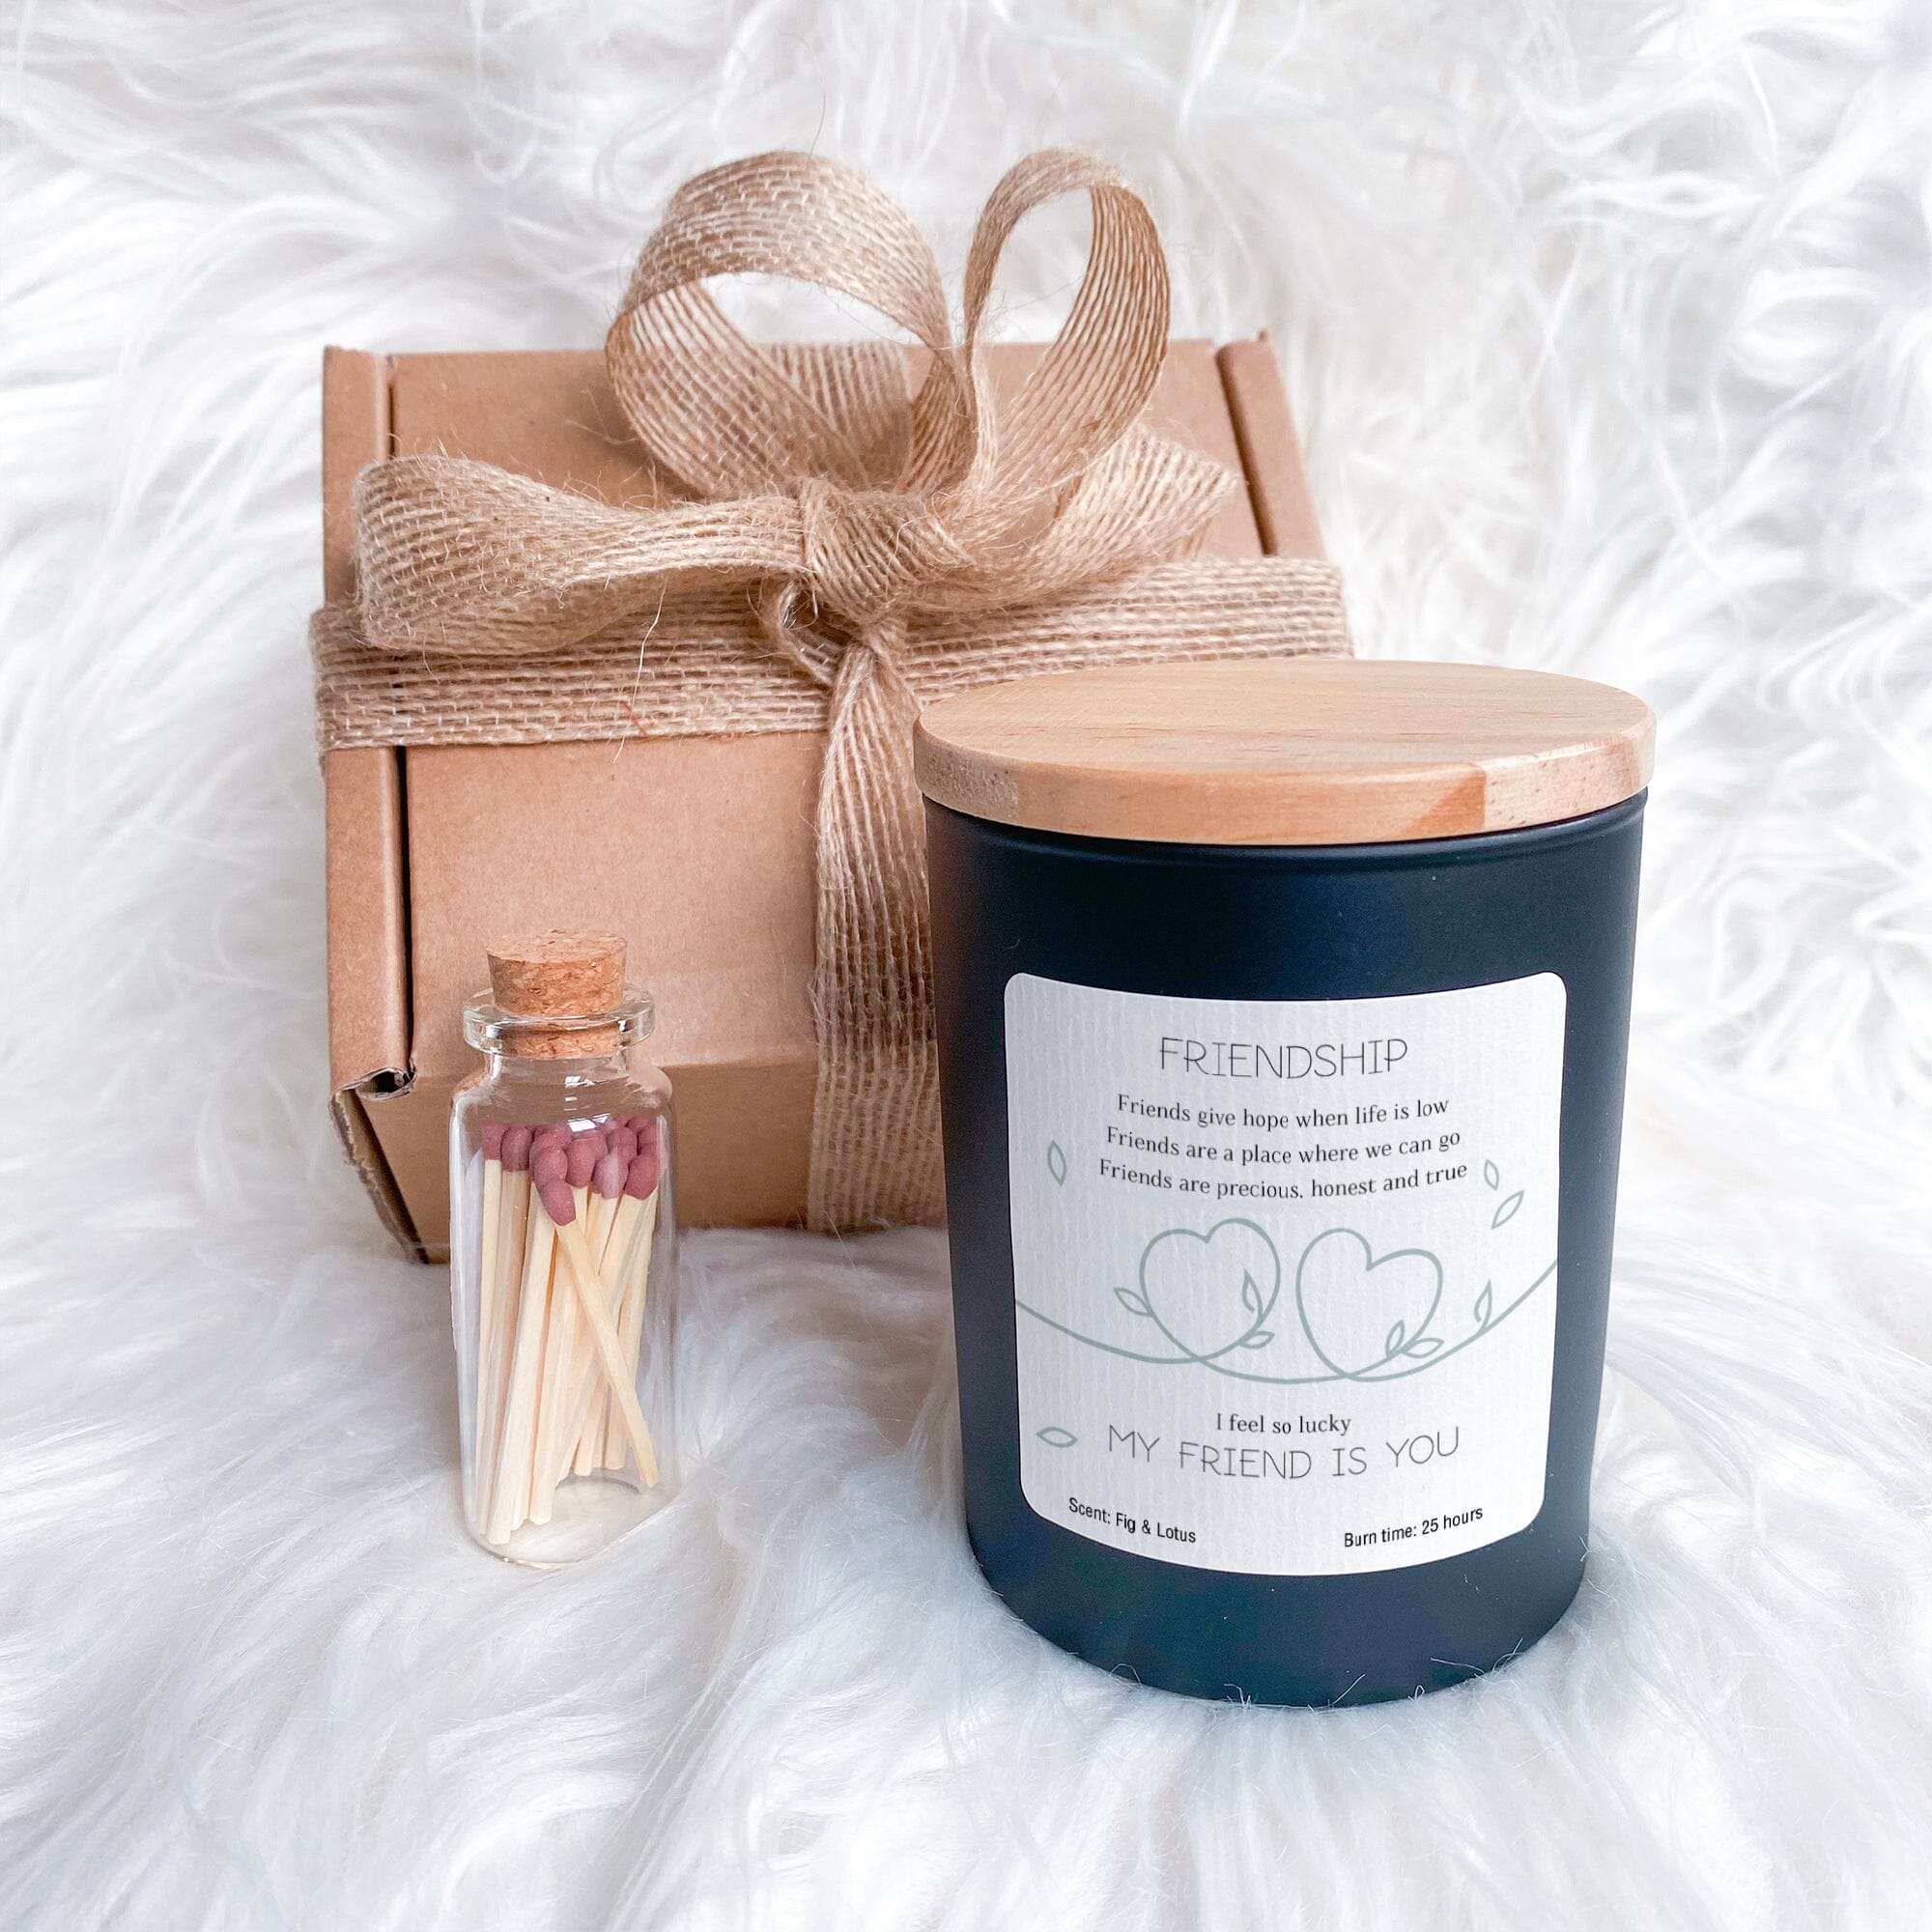 Friendship Scented Candle Gift and Gift Box, I Feel So Lucky My Friend Is You, Best friend Christmas Birthday Gift